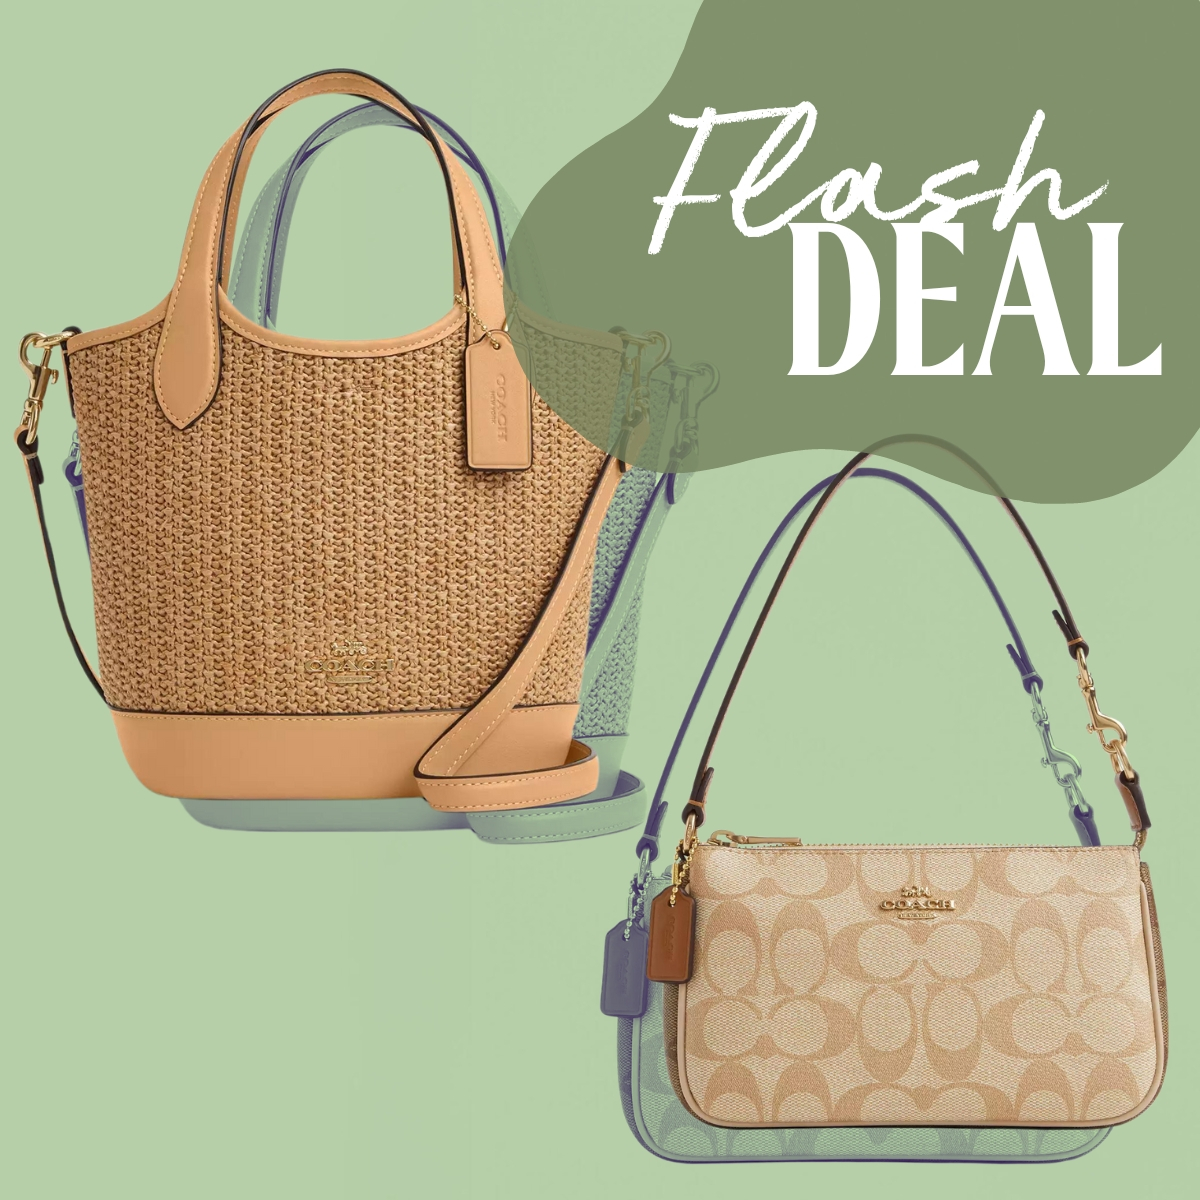 Coach Outlet’s Memorial Day Sale Includes $23…